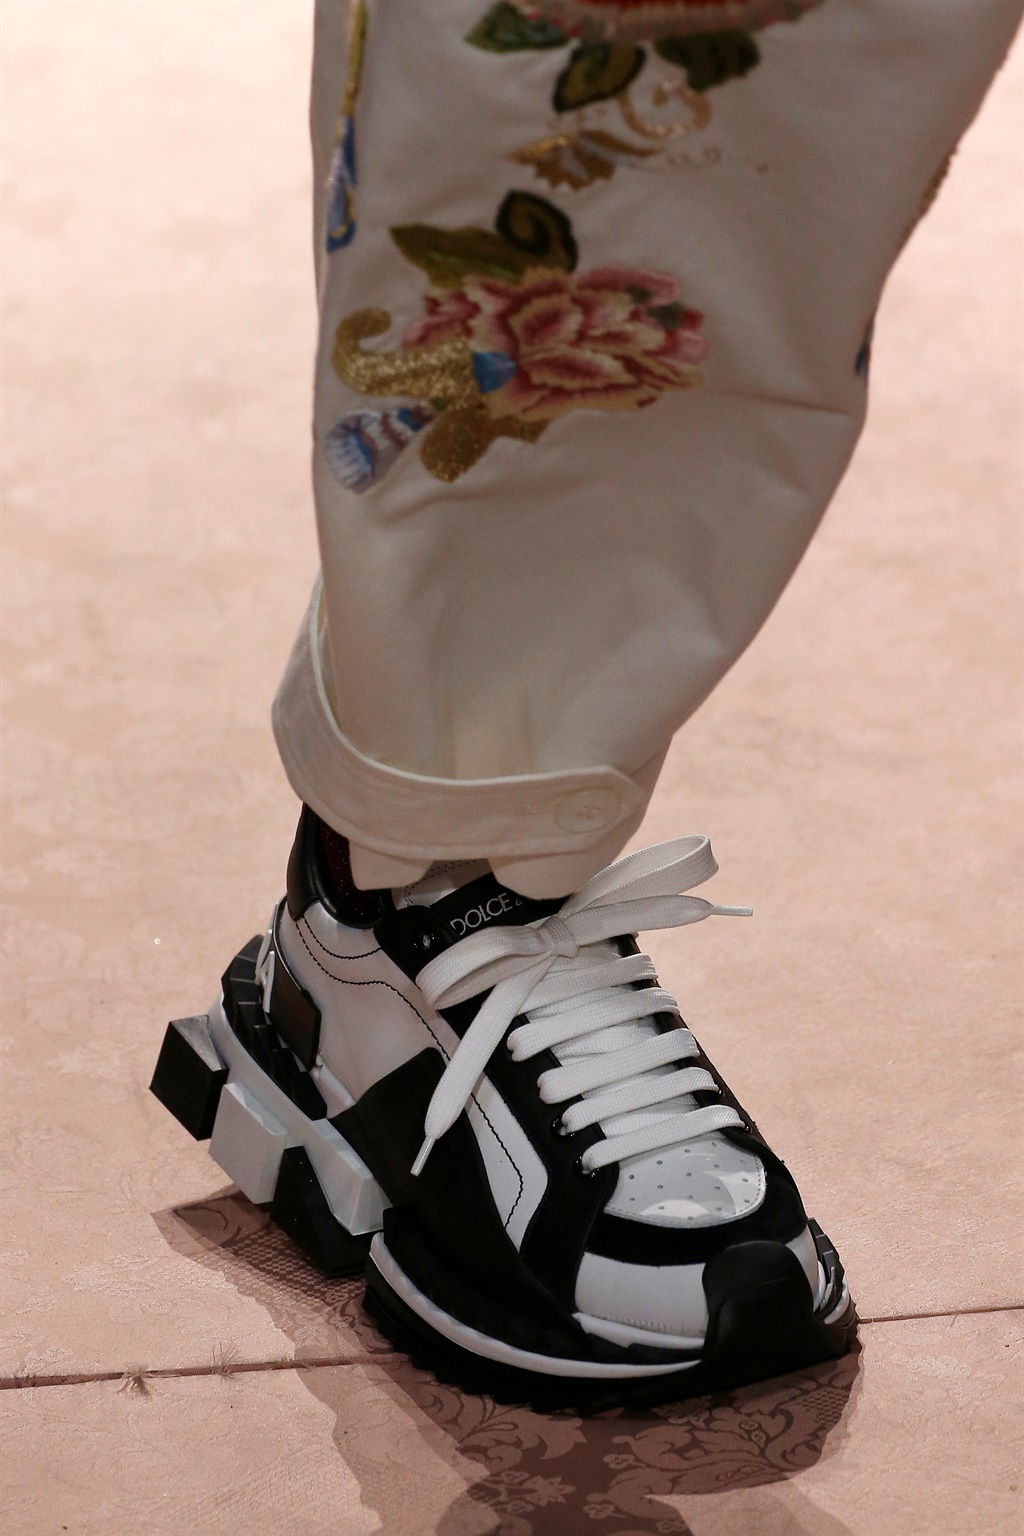 Shoe detail at the Dolce & Gabbana show during Mil